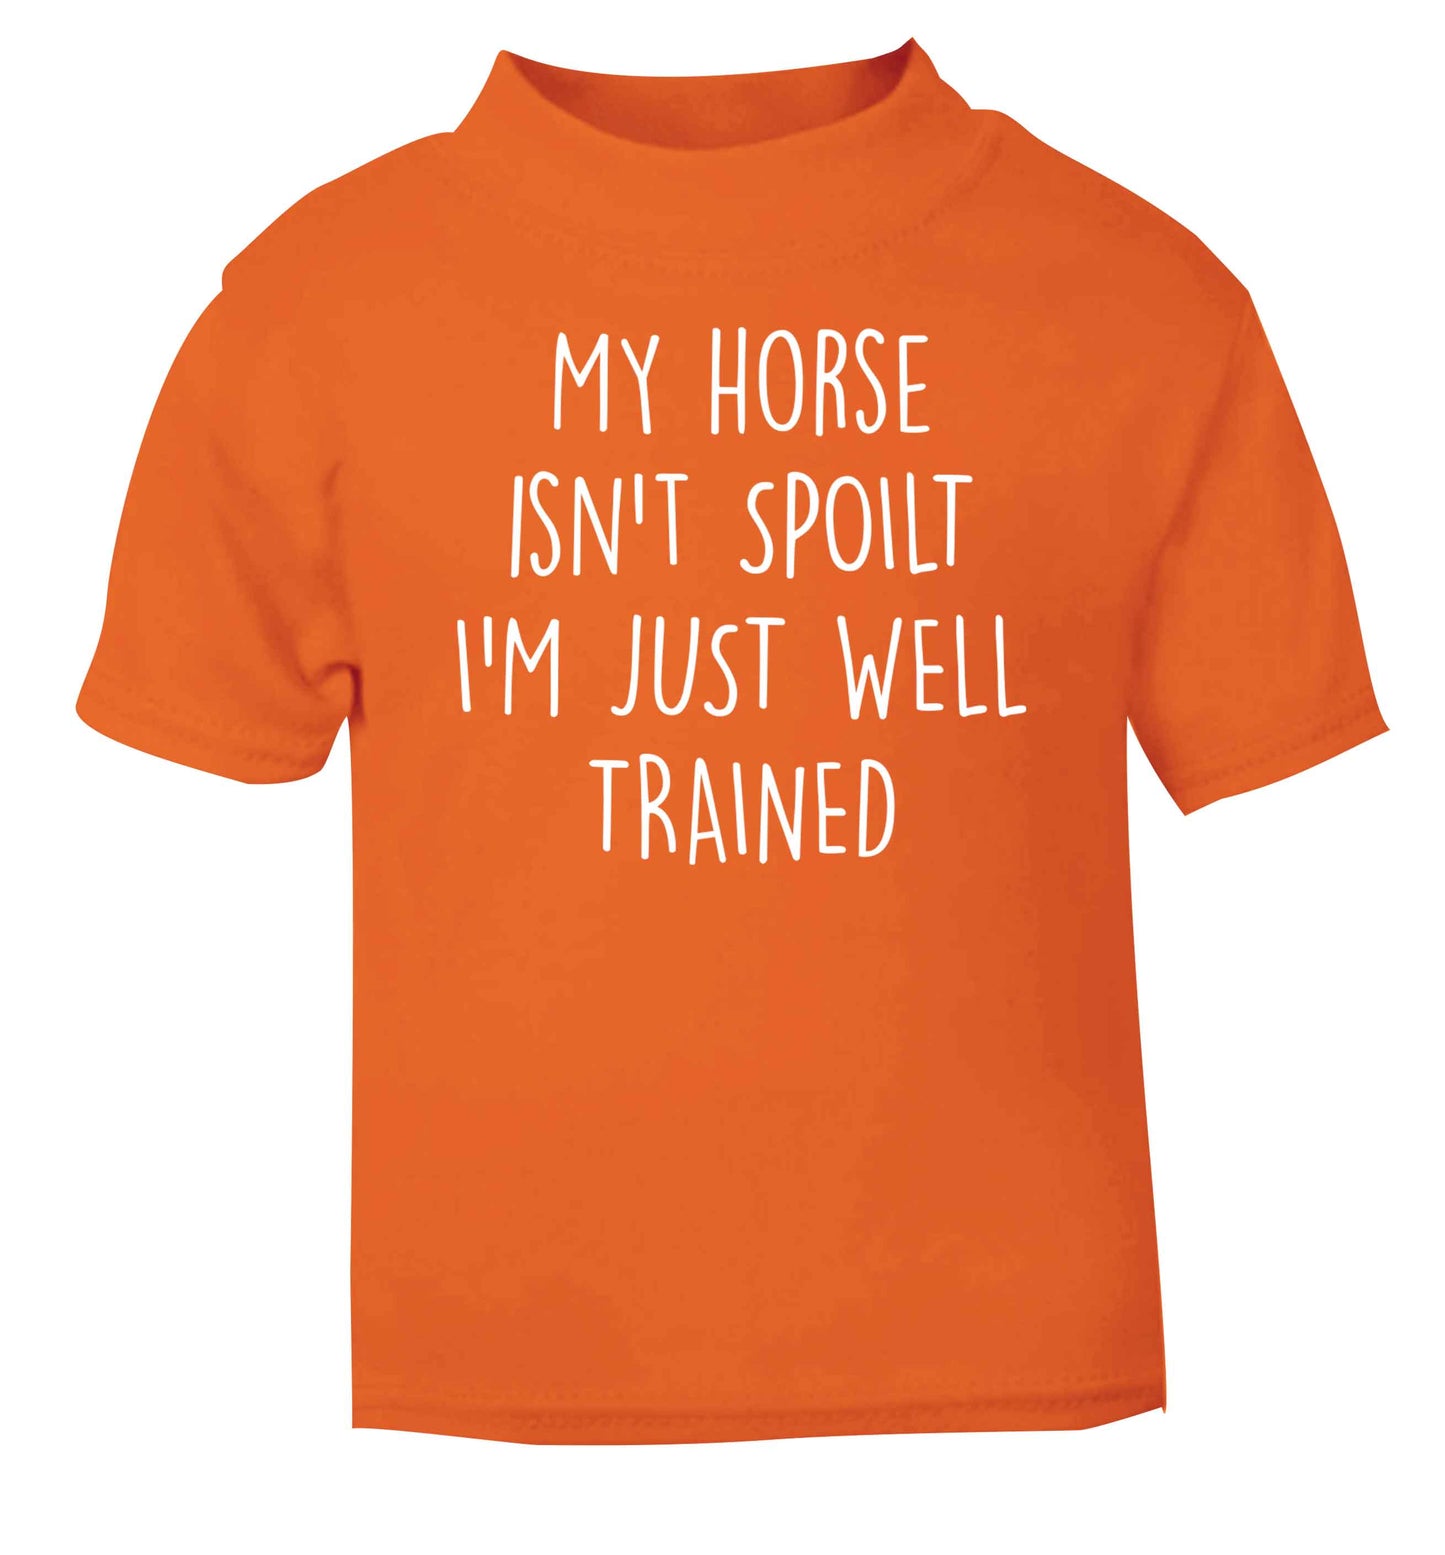 My horse isn't spoilt I'm just well trained orange baby toddler Tshirt 2 Years